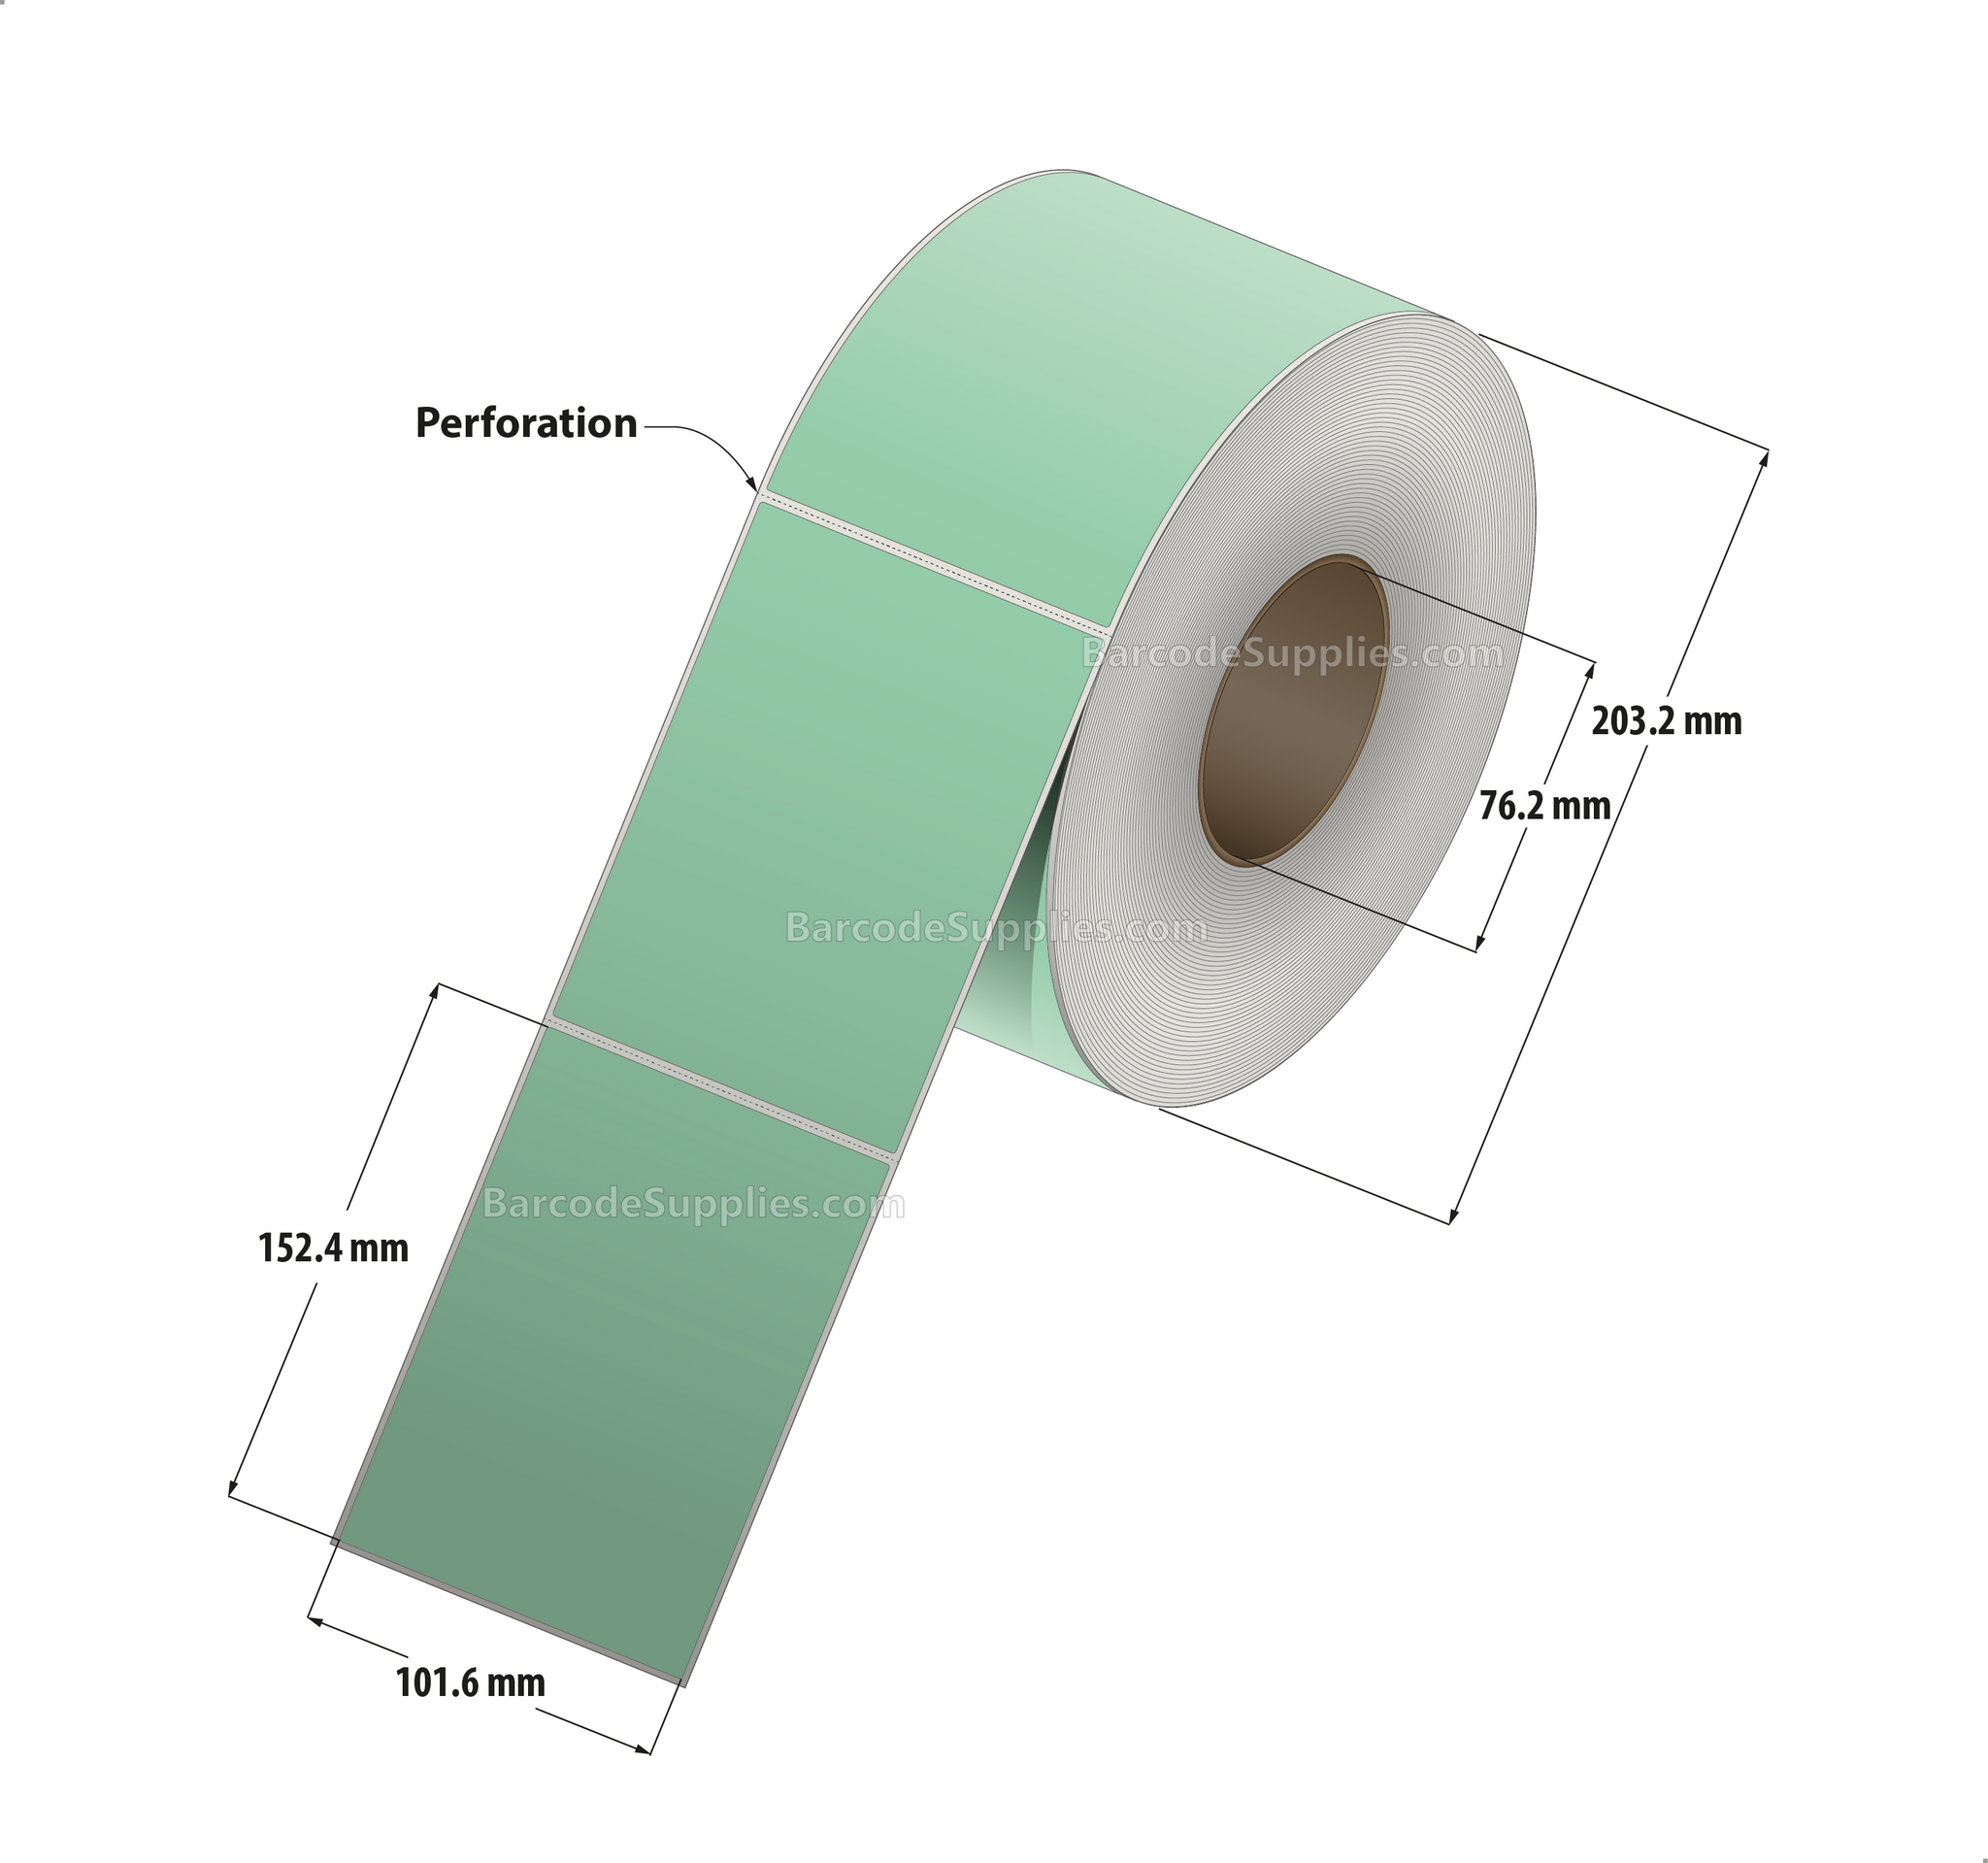 4 x 6 Thermal Transfer 345 Green Labels With Permanent Adhesive - Perforated - 1000 Labels Per Roll - Carton Of 4 Rolls - 4000 Labels Total - MPN: RFC-4-6-1000-GR